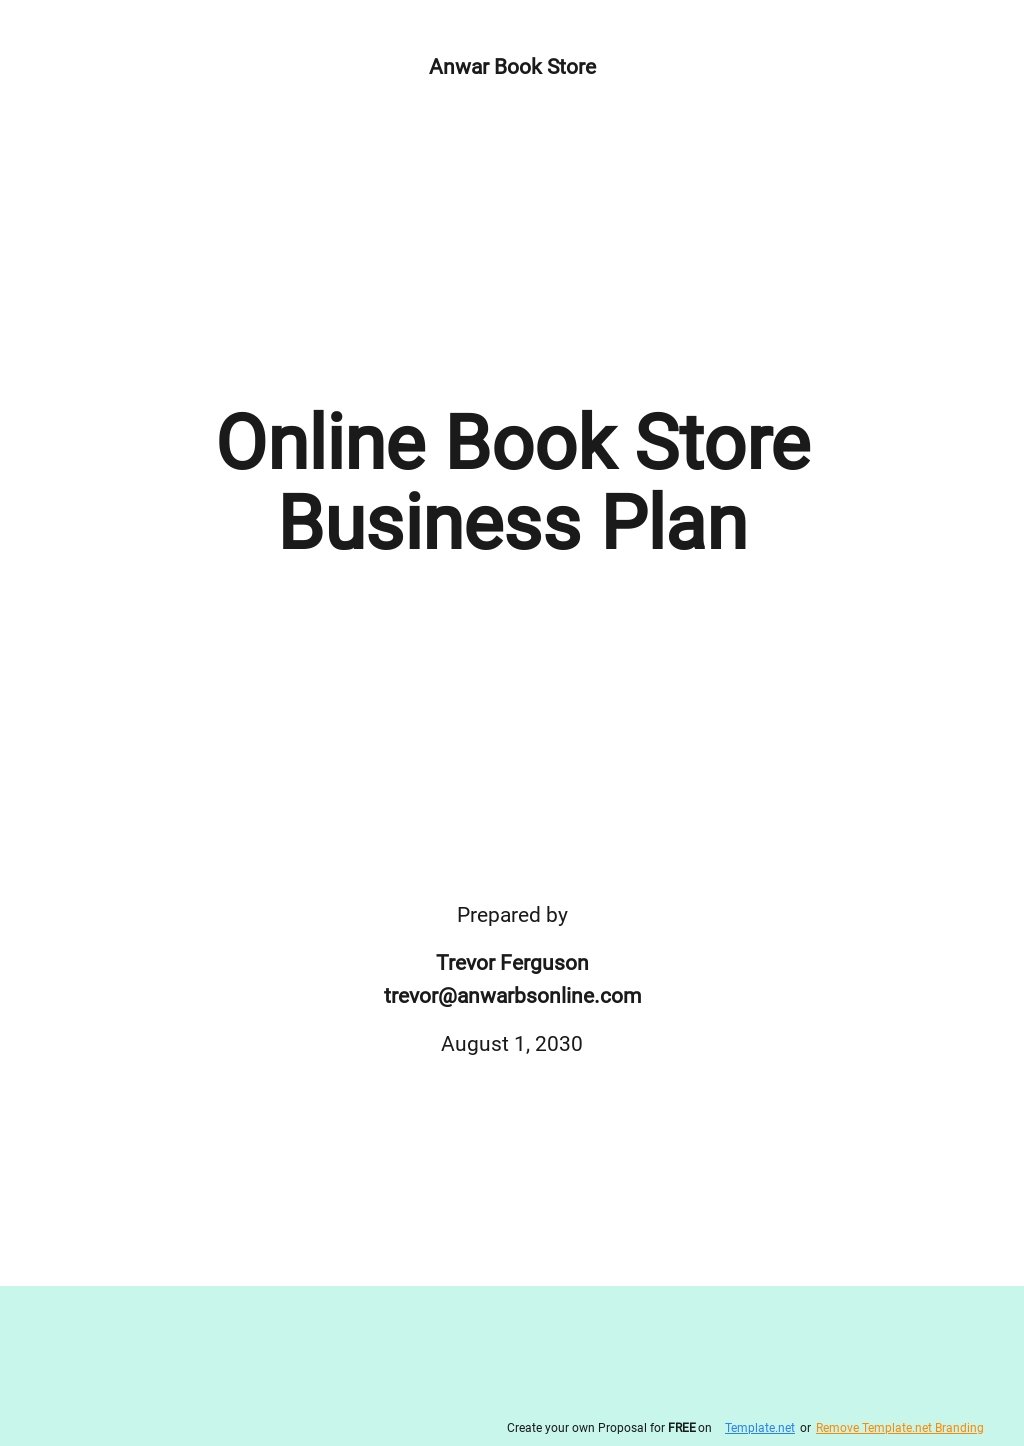 20+ Ecommerce Plan Templates - Free Downloads  Template.net Throughout Ecommerce Website Business Plan Template